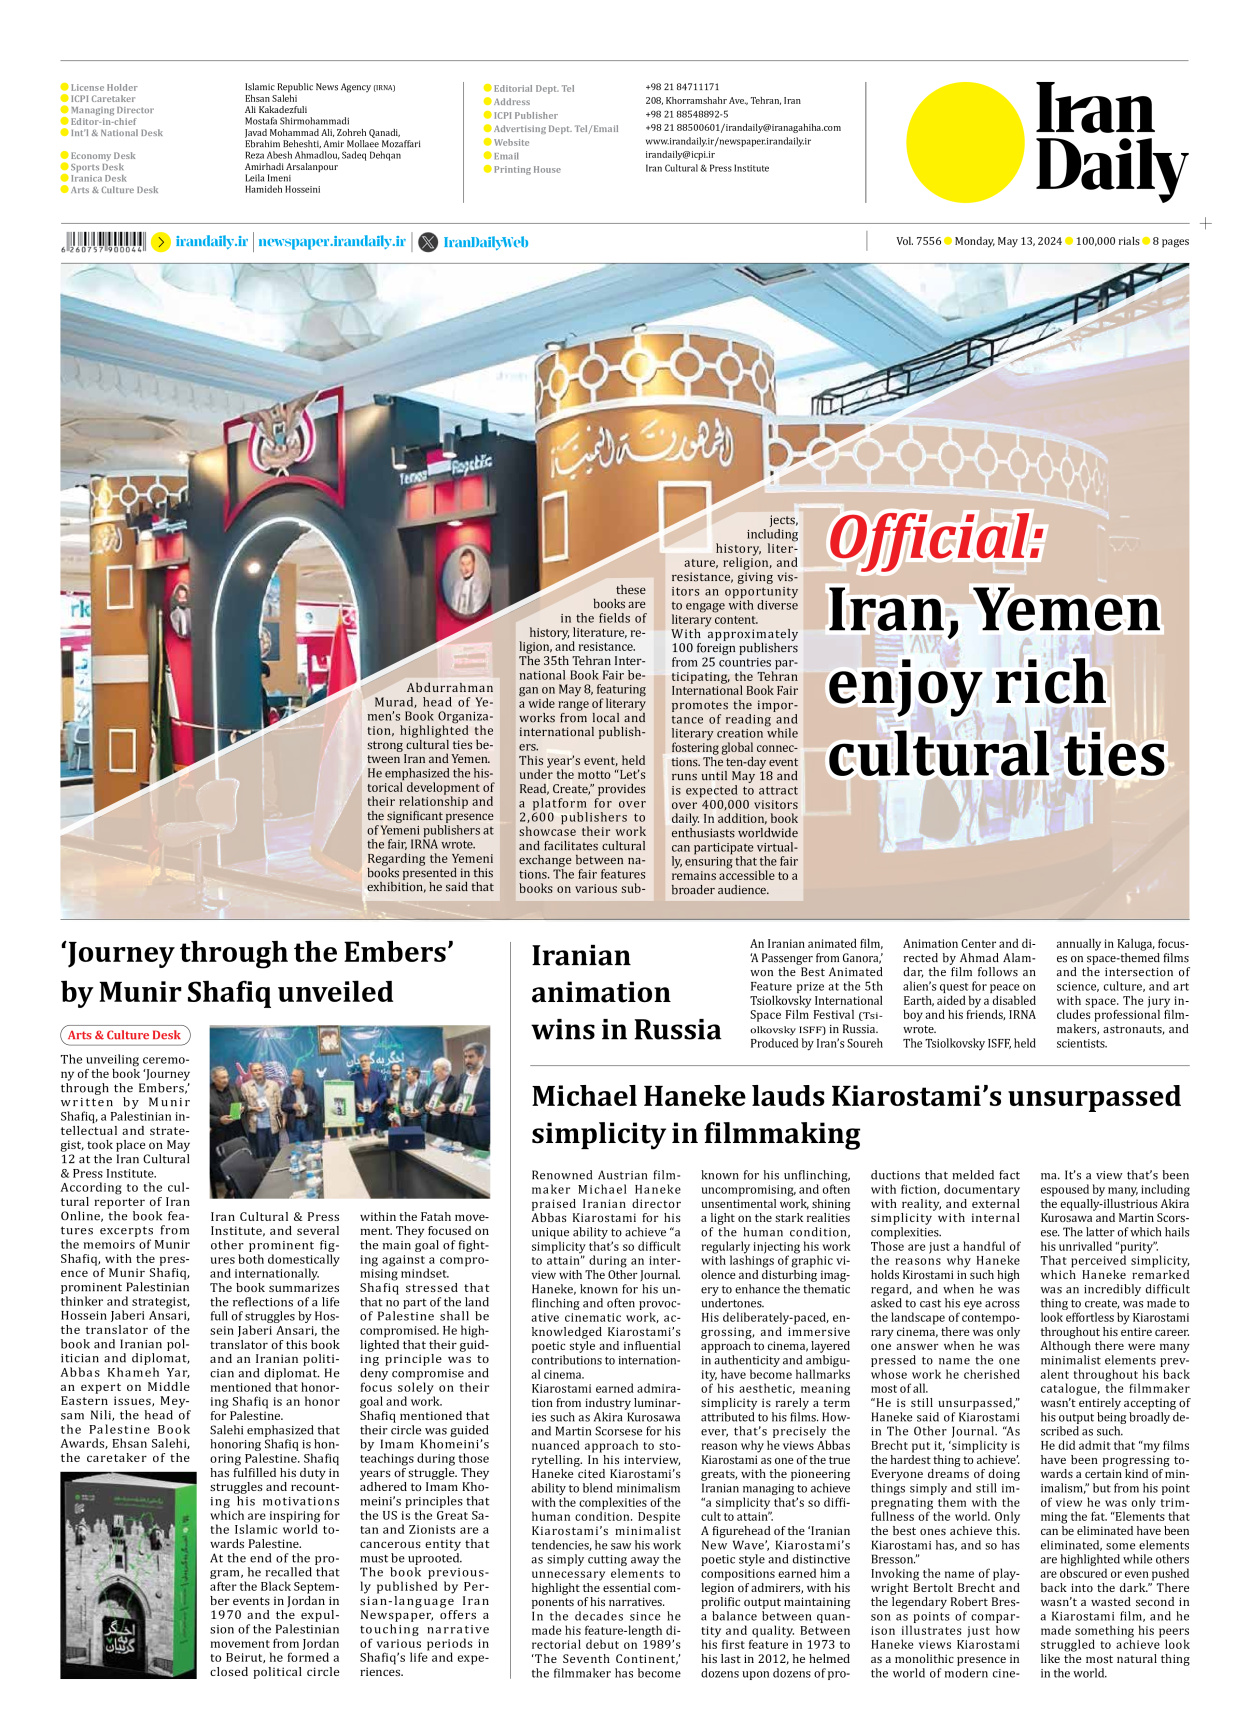 Iran Daily - Number Seven Thousand Five Hundred and Fifty Six - 13 May 2024 - Page 8